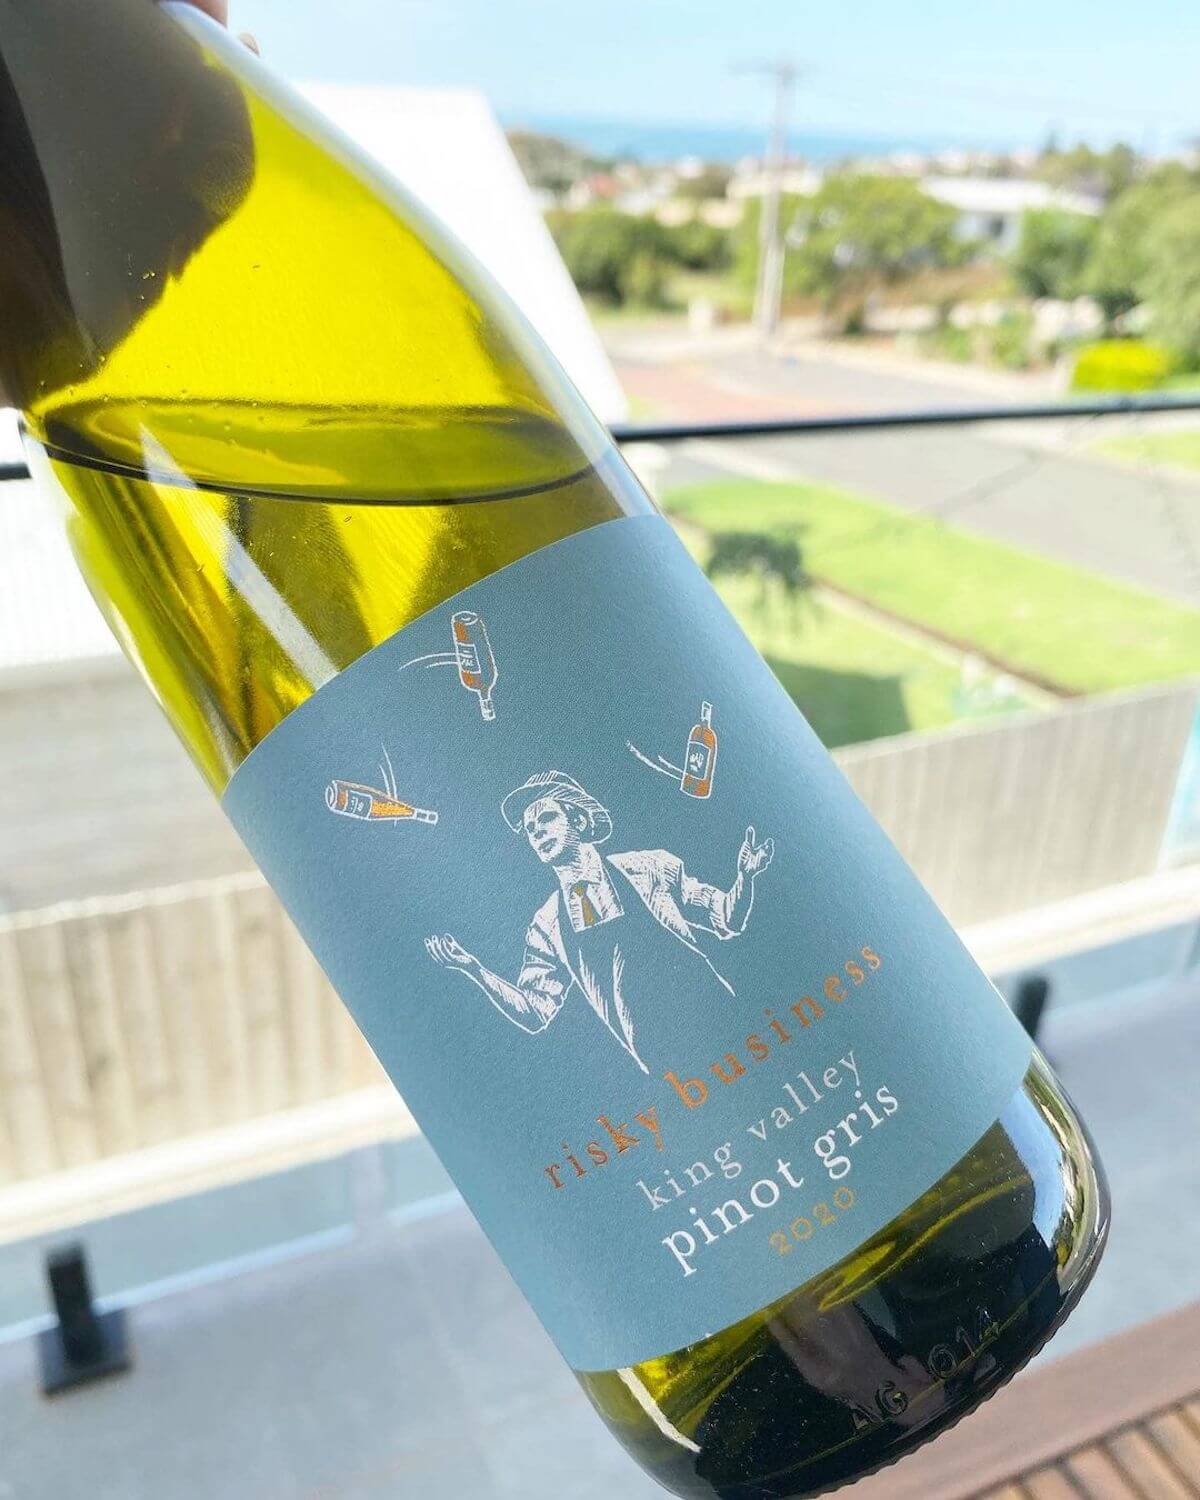 Risky Business King Valley Pinot Gris 2020